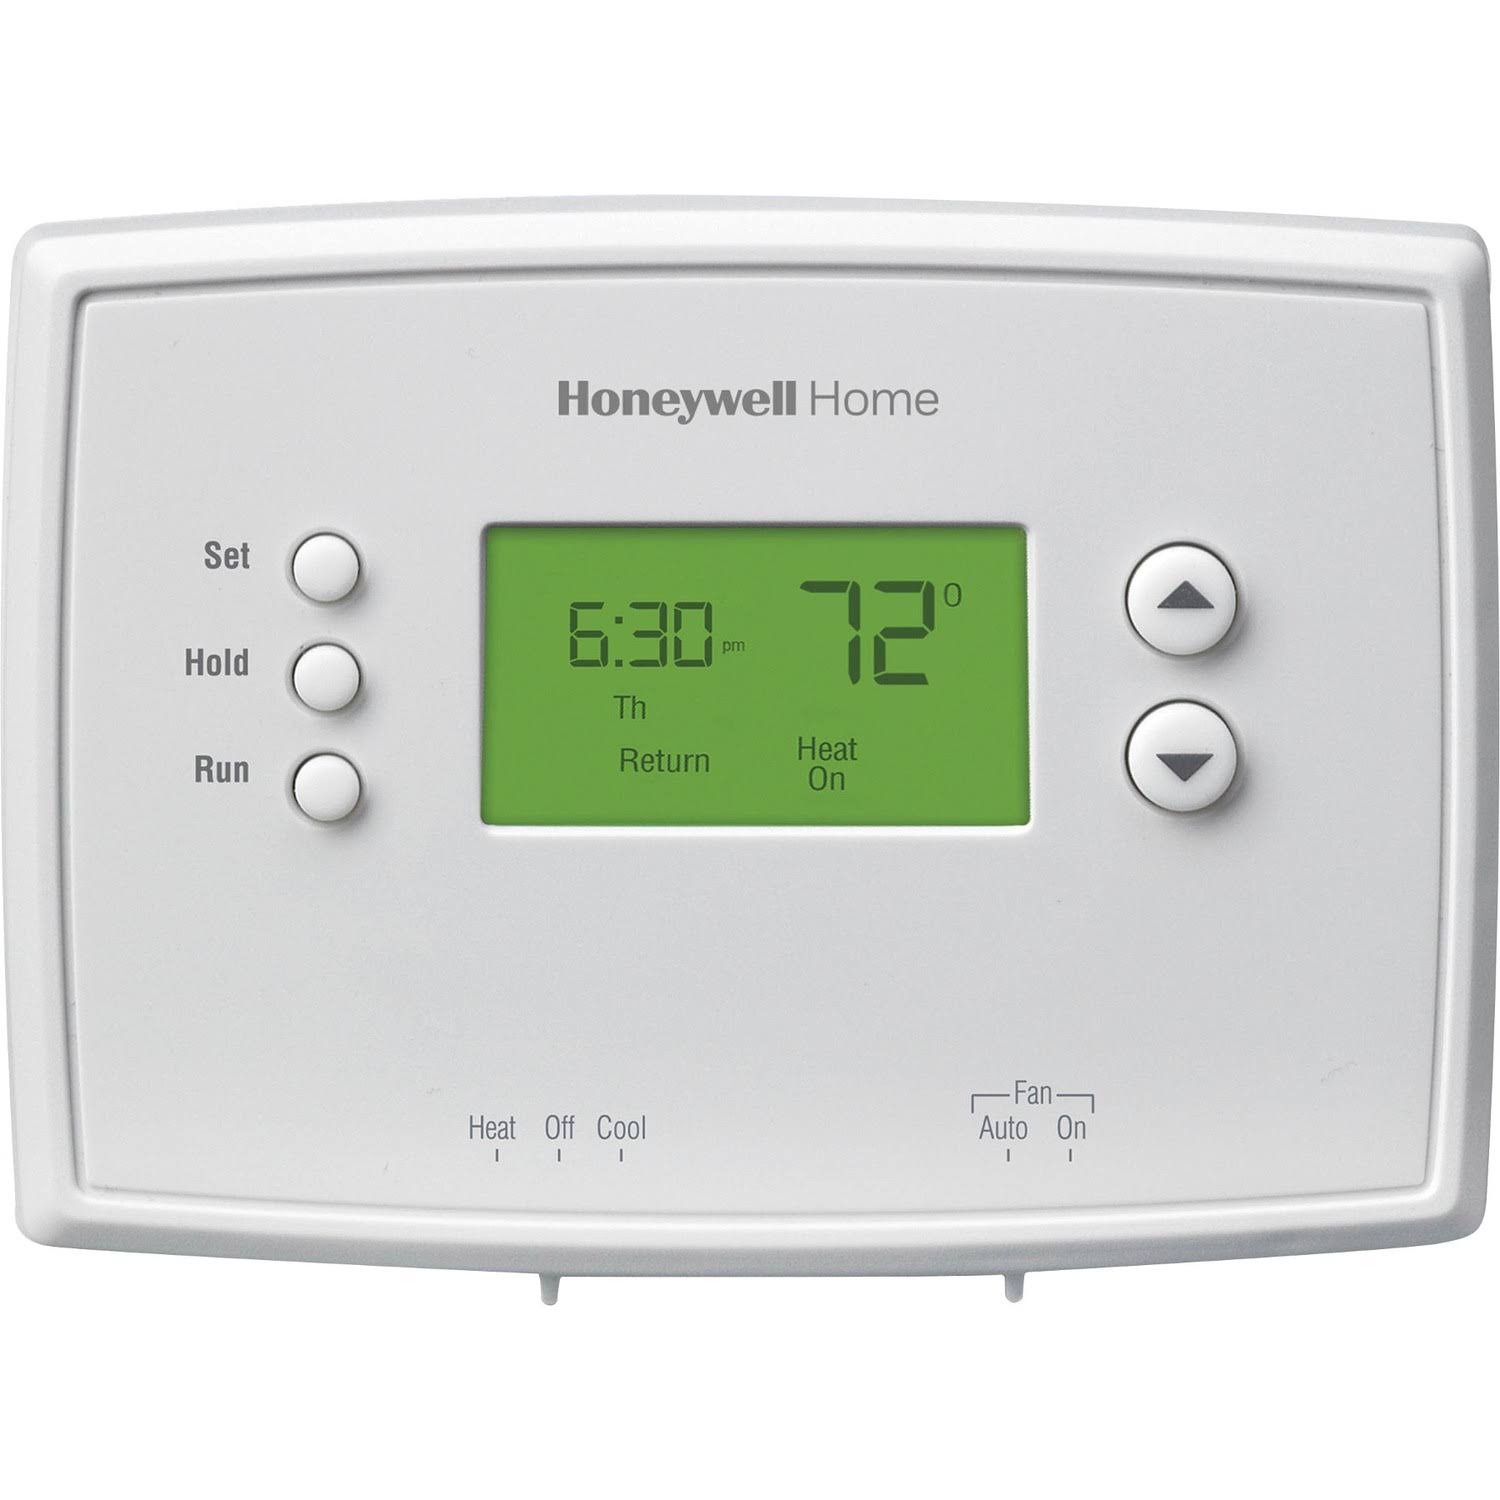 Honeywell 5-2 Day Programmable Thermostat - White